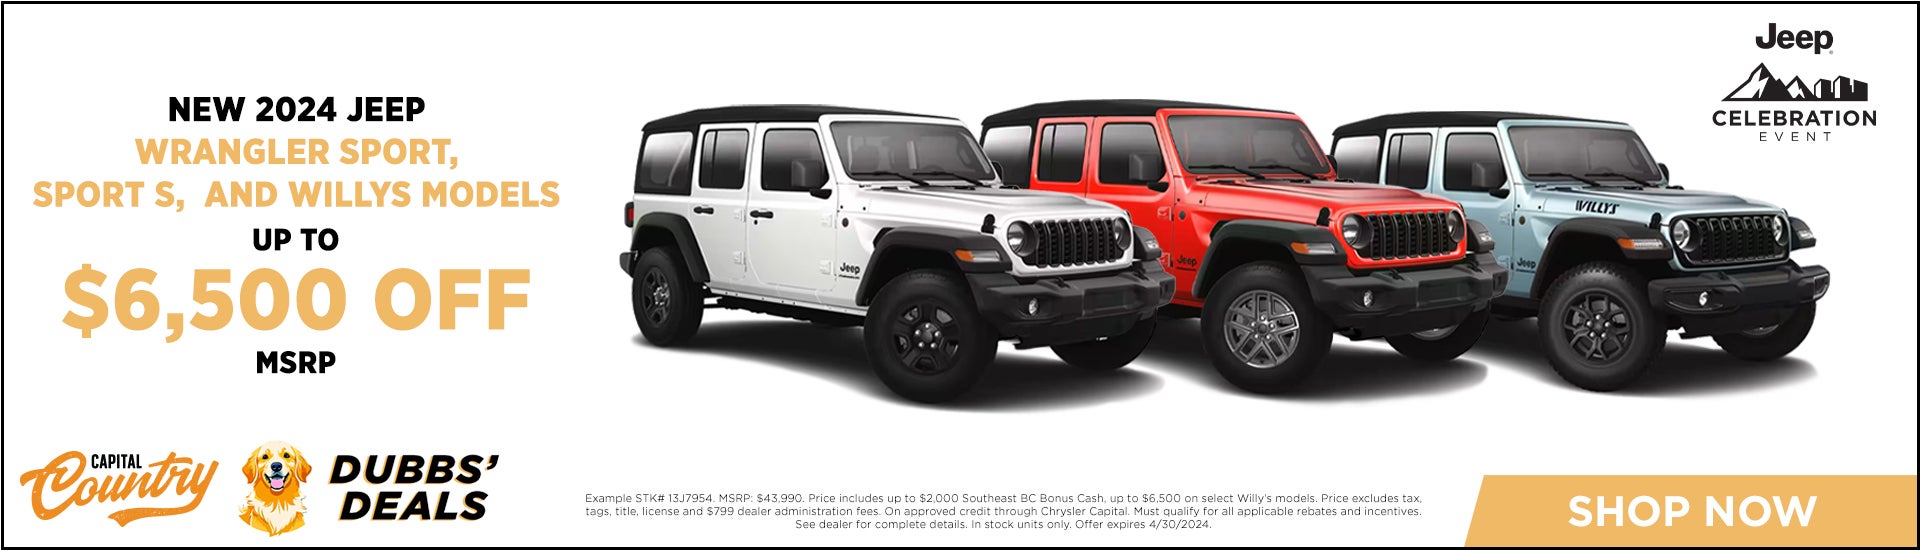 New 2024 Jeep Wrangler Sport, Sport S, and Willy’s Models